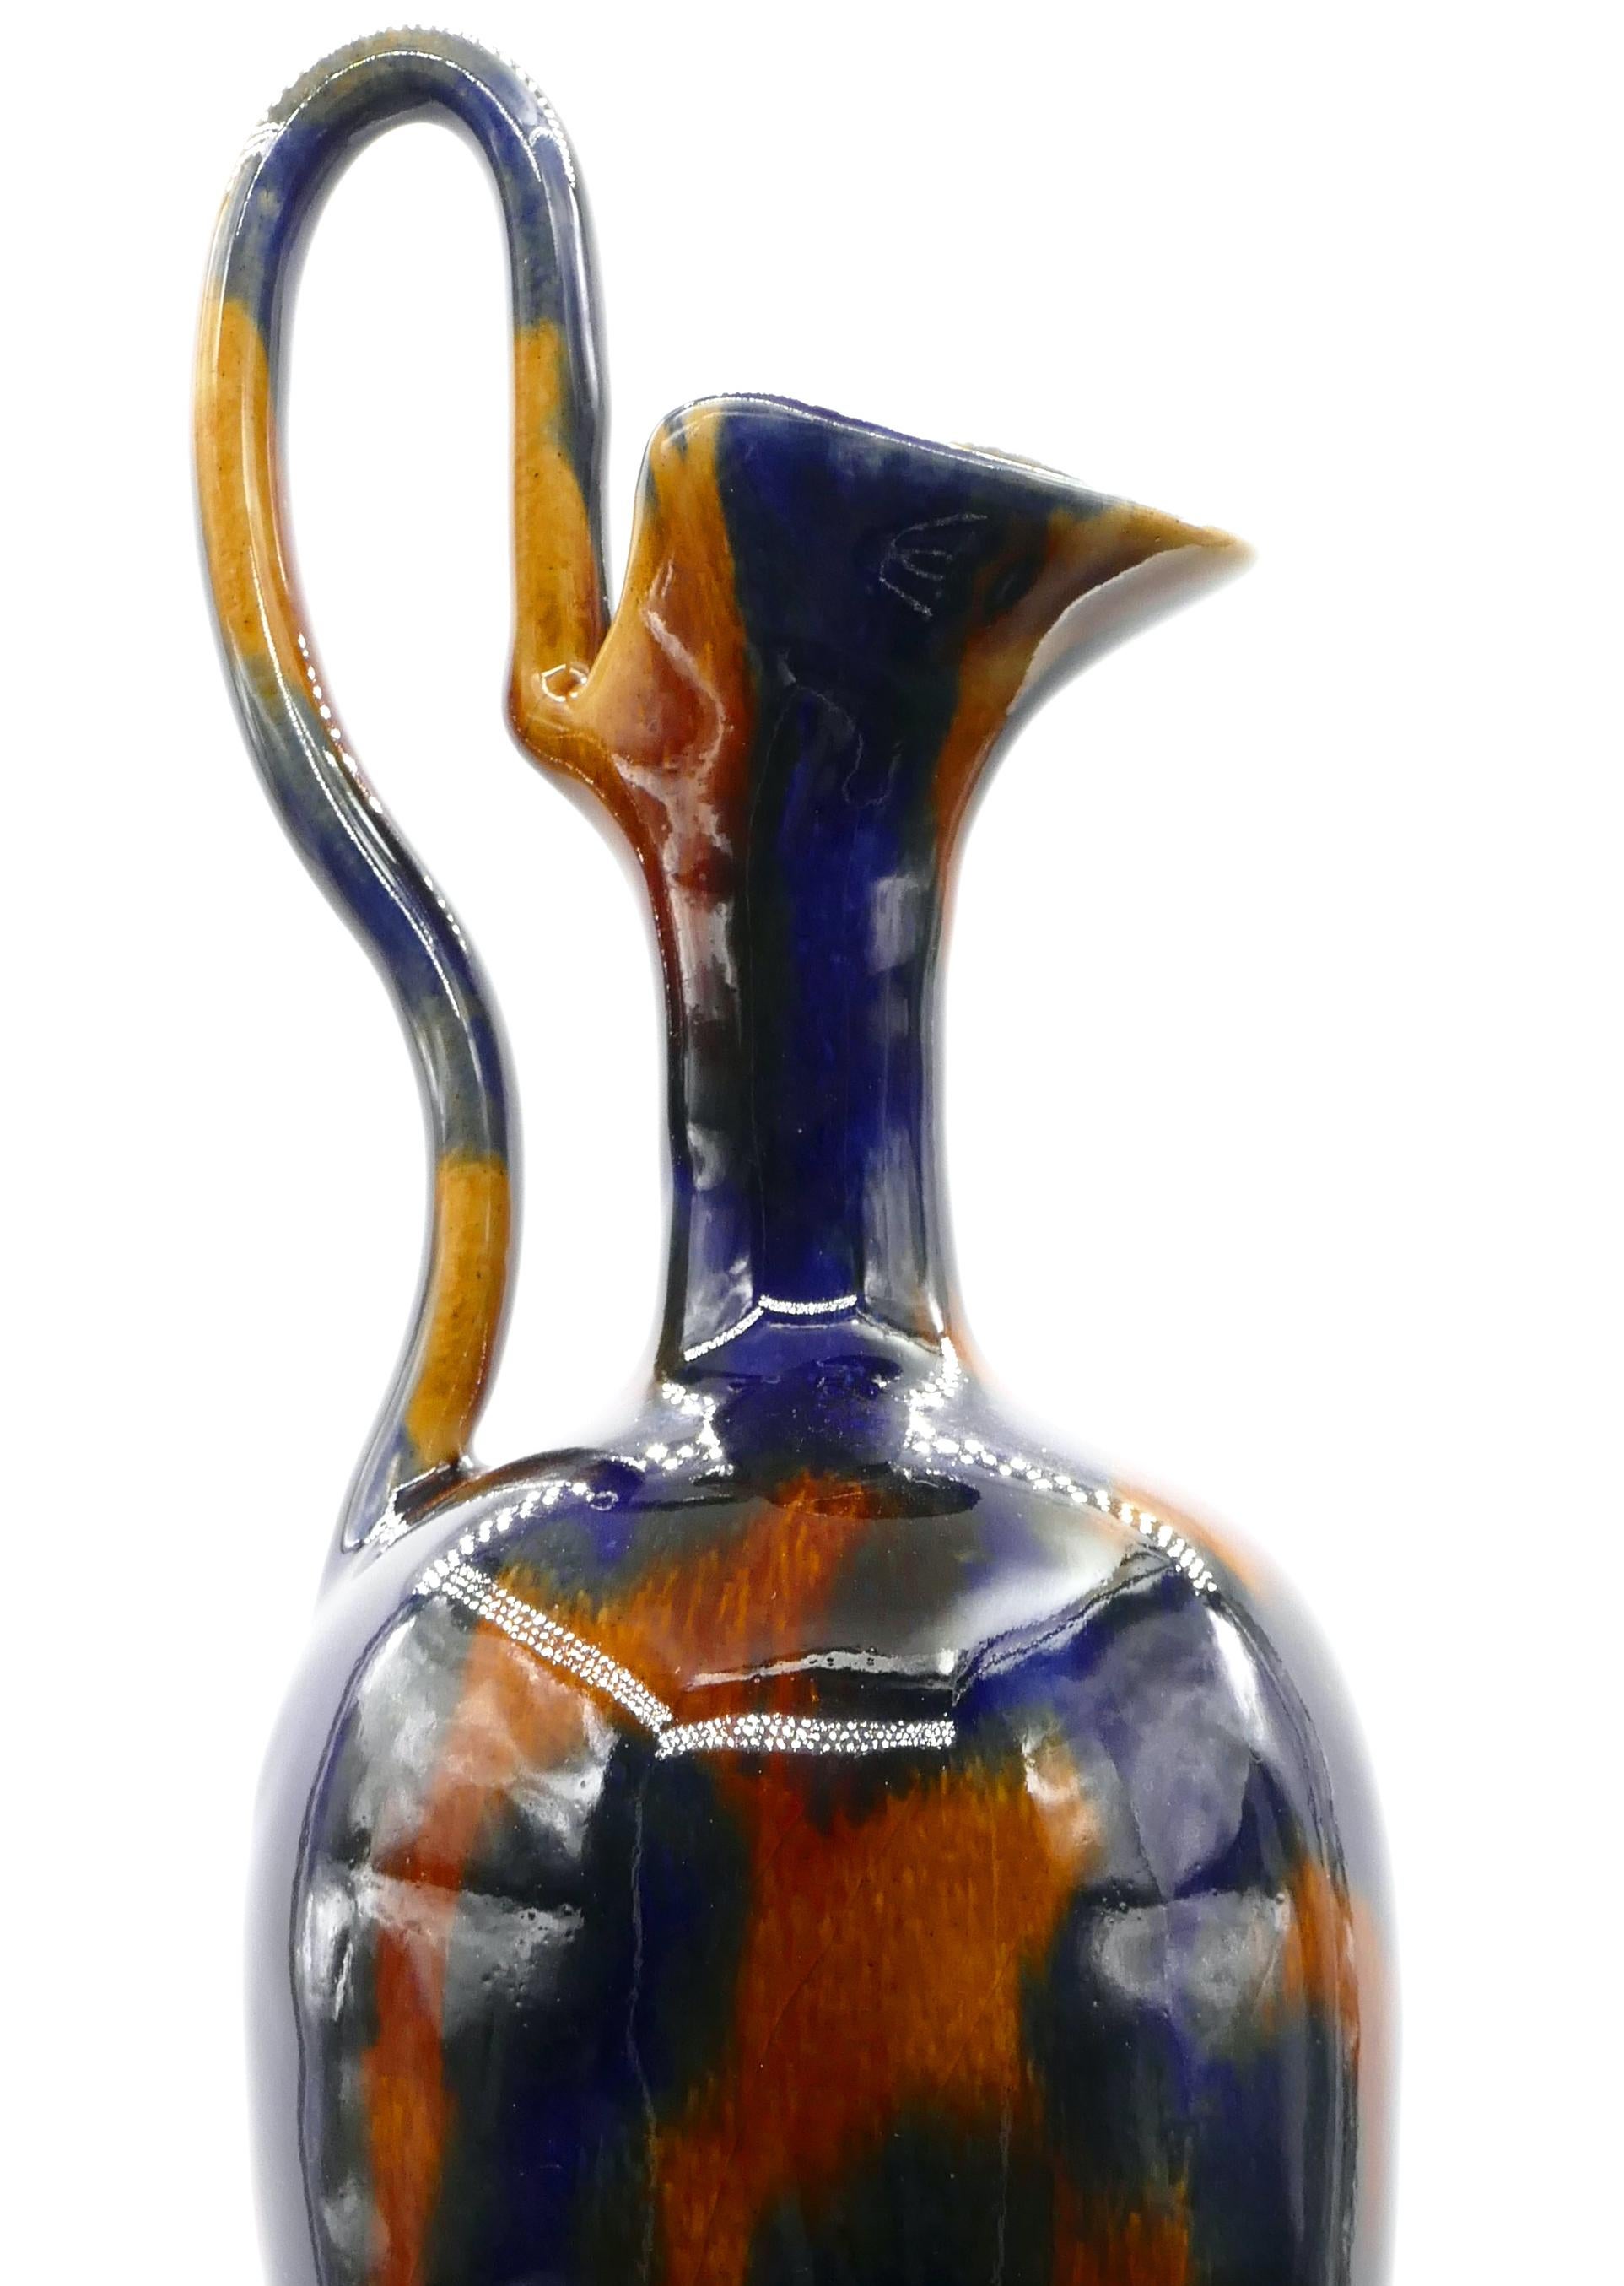 Vase with handle and spout is an original decorative object realized in the first half of the 20th century. 

Original colored glazed pottery. 

Made in United Kingdom by Denby Pottery. 

Mint conditions.

Fine 20th century work realized in